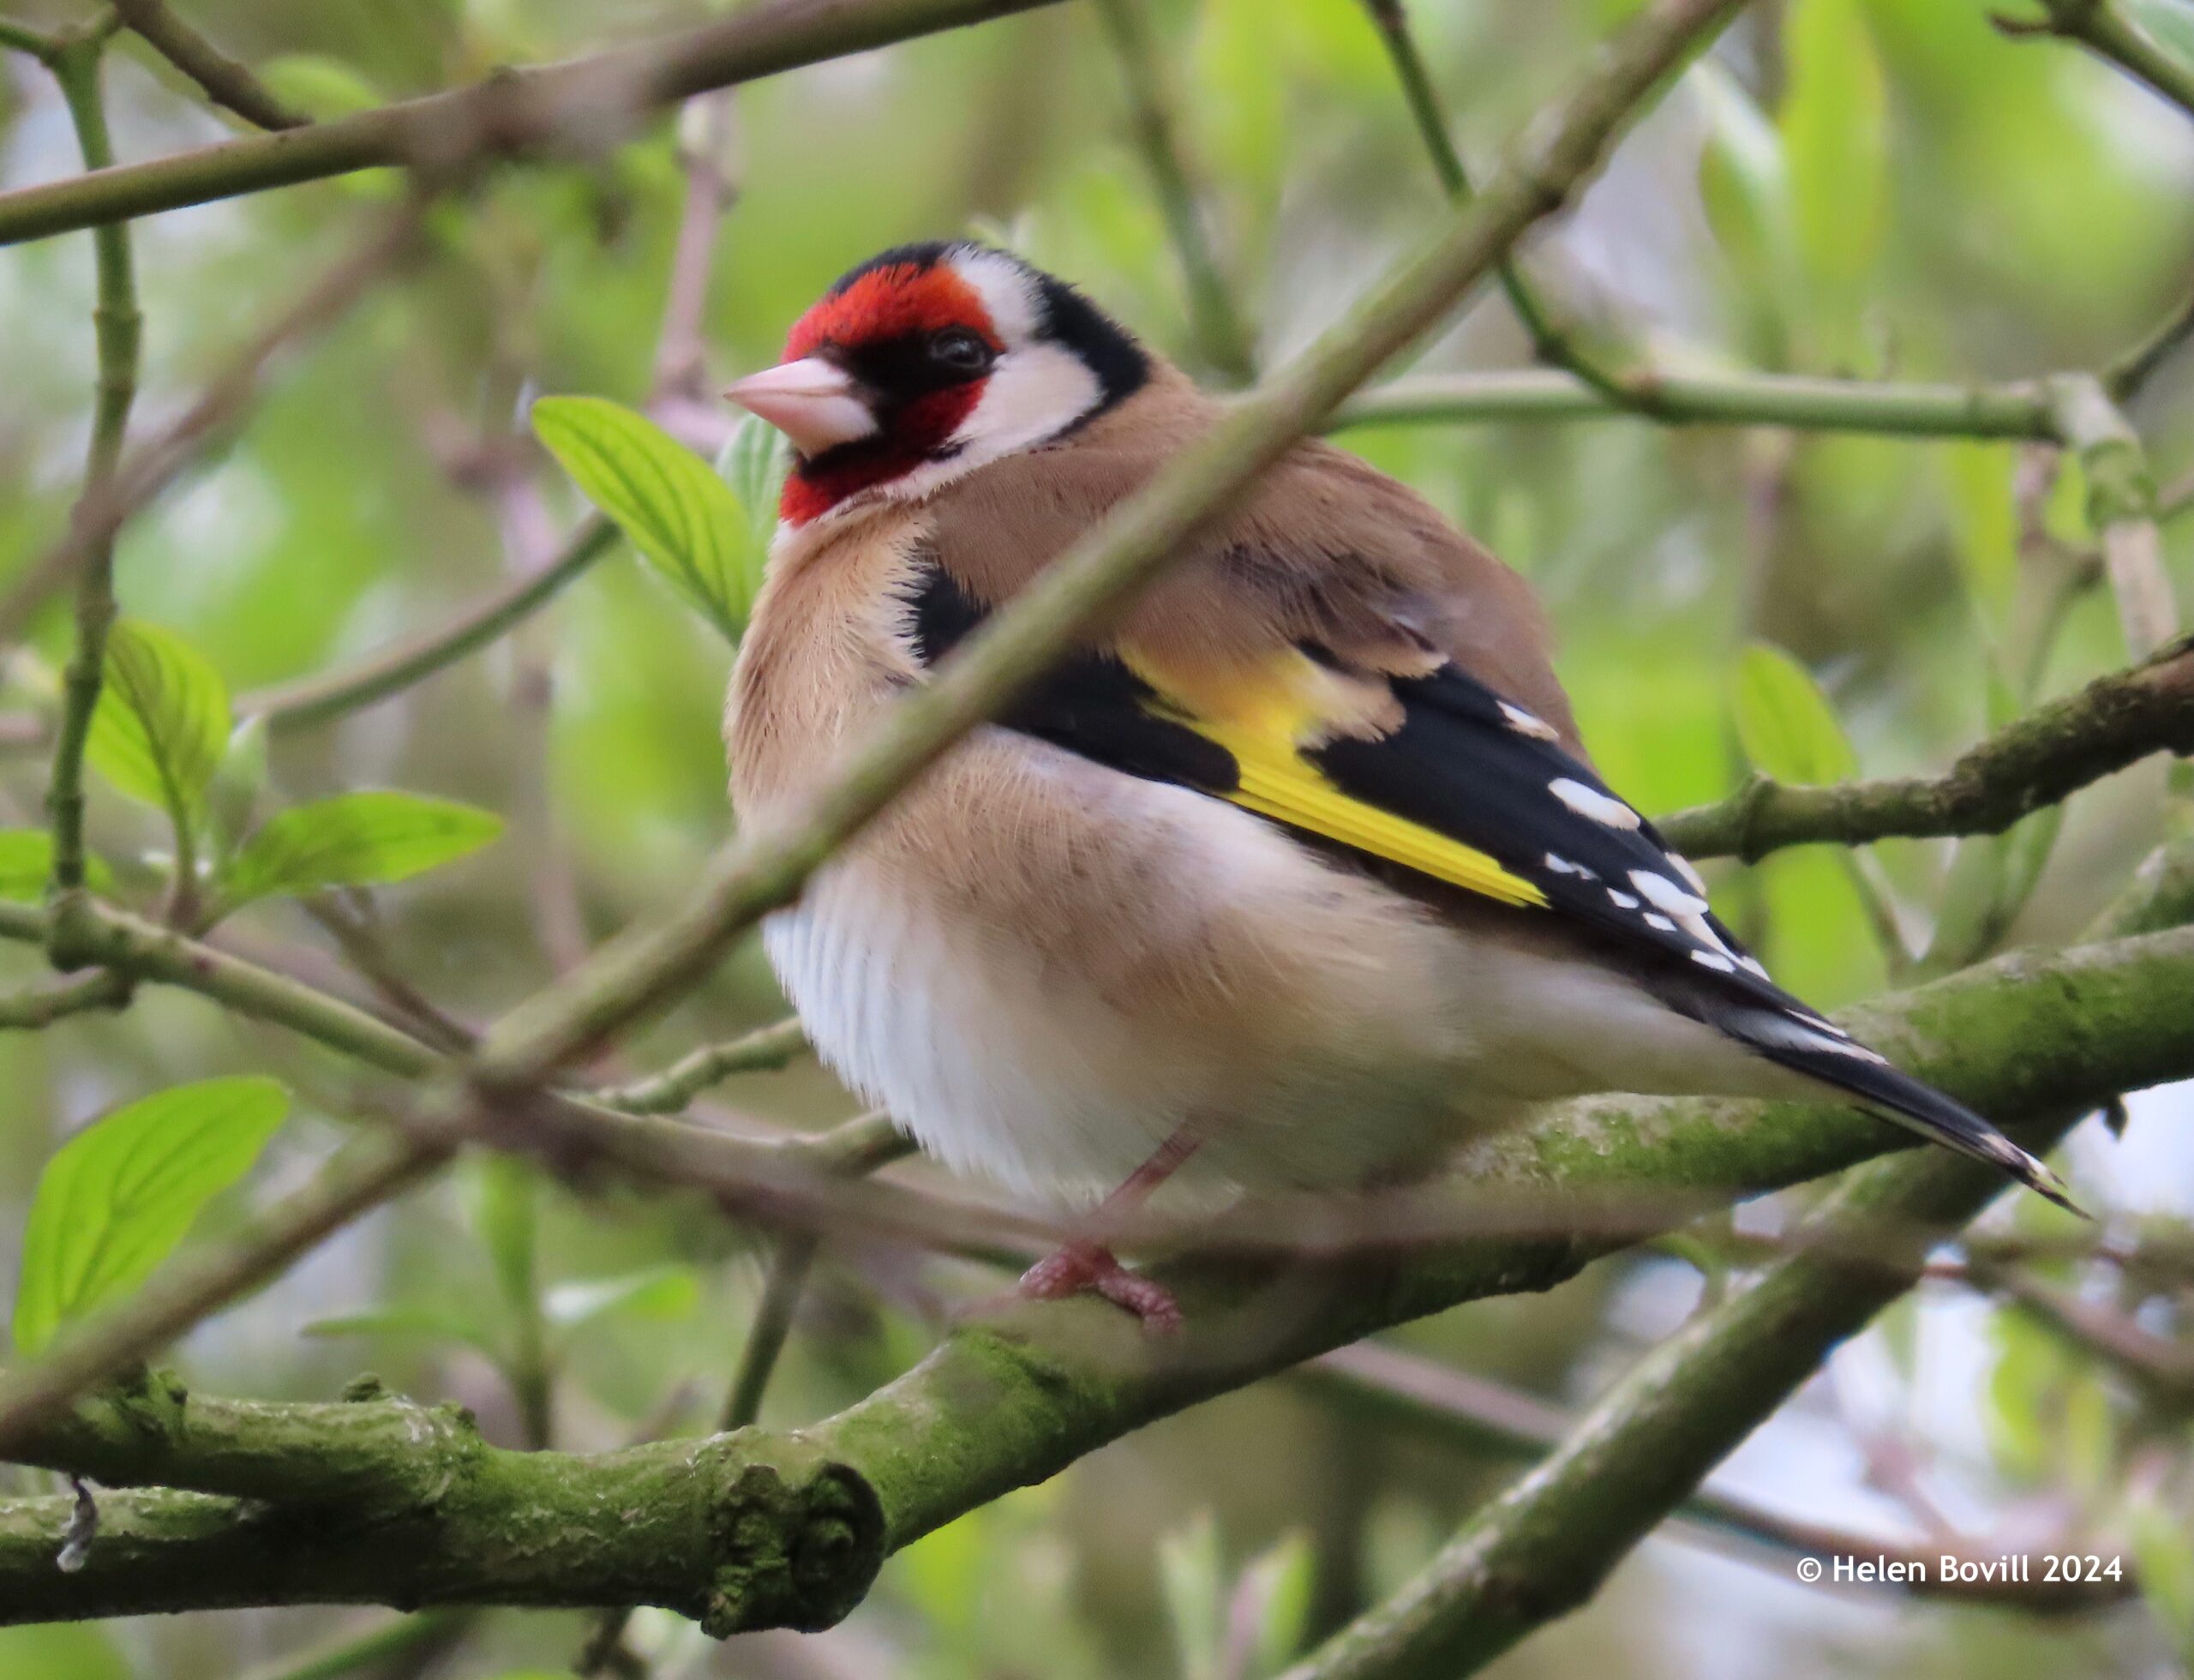 A goldfinch high in a tree in the cemetery